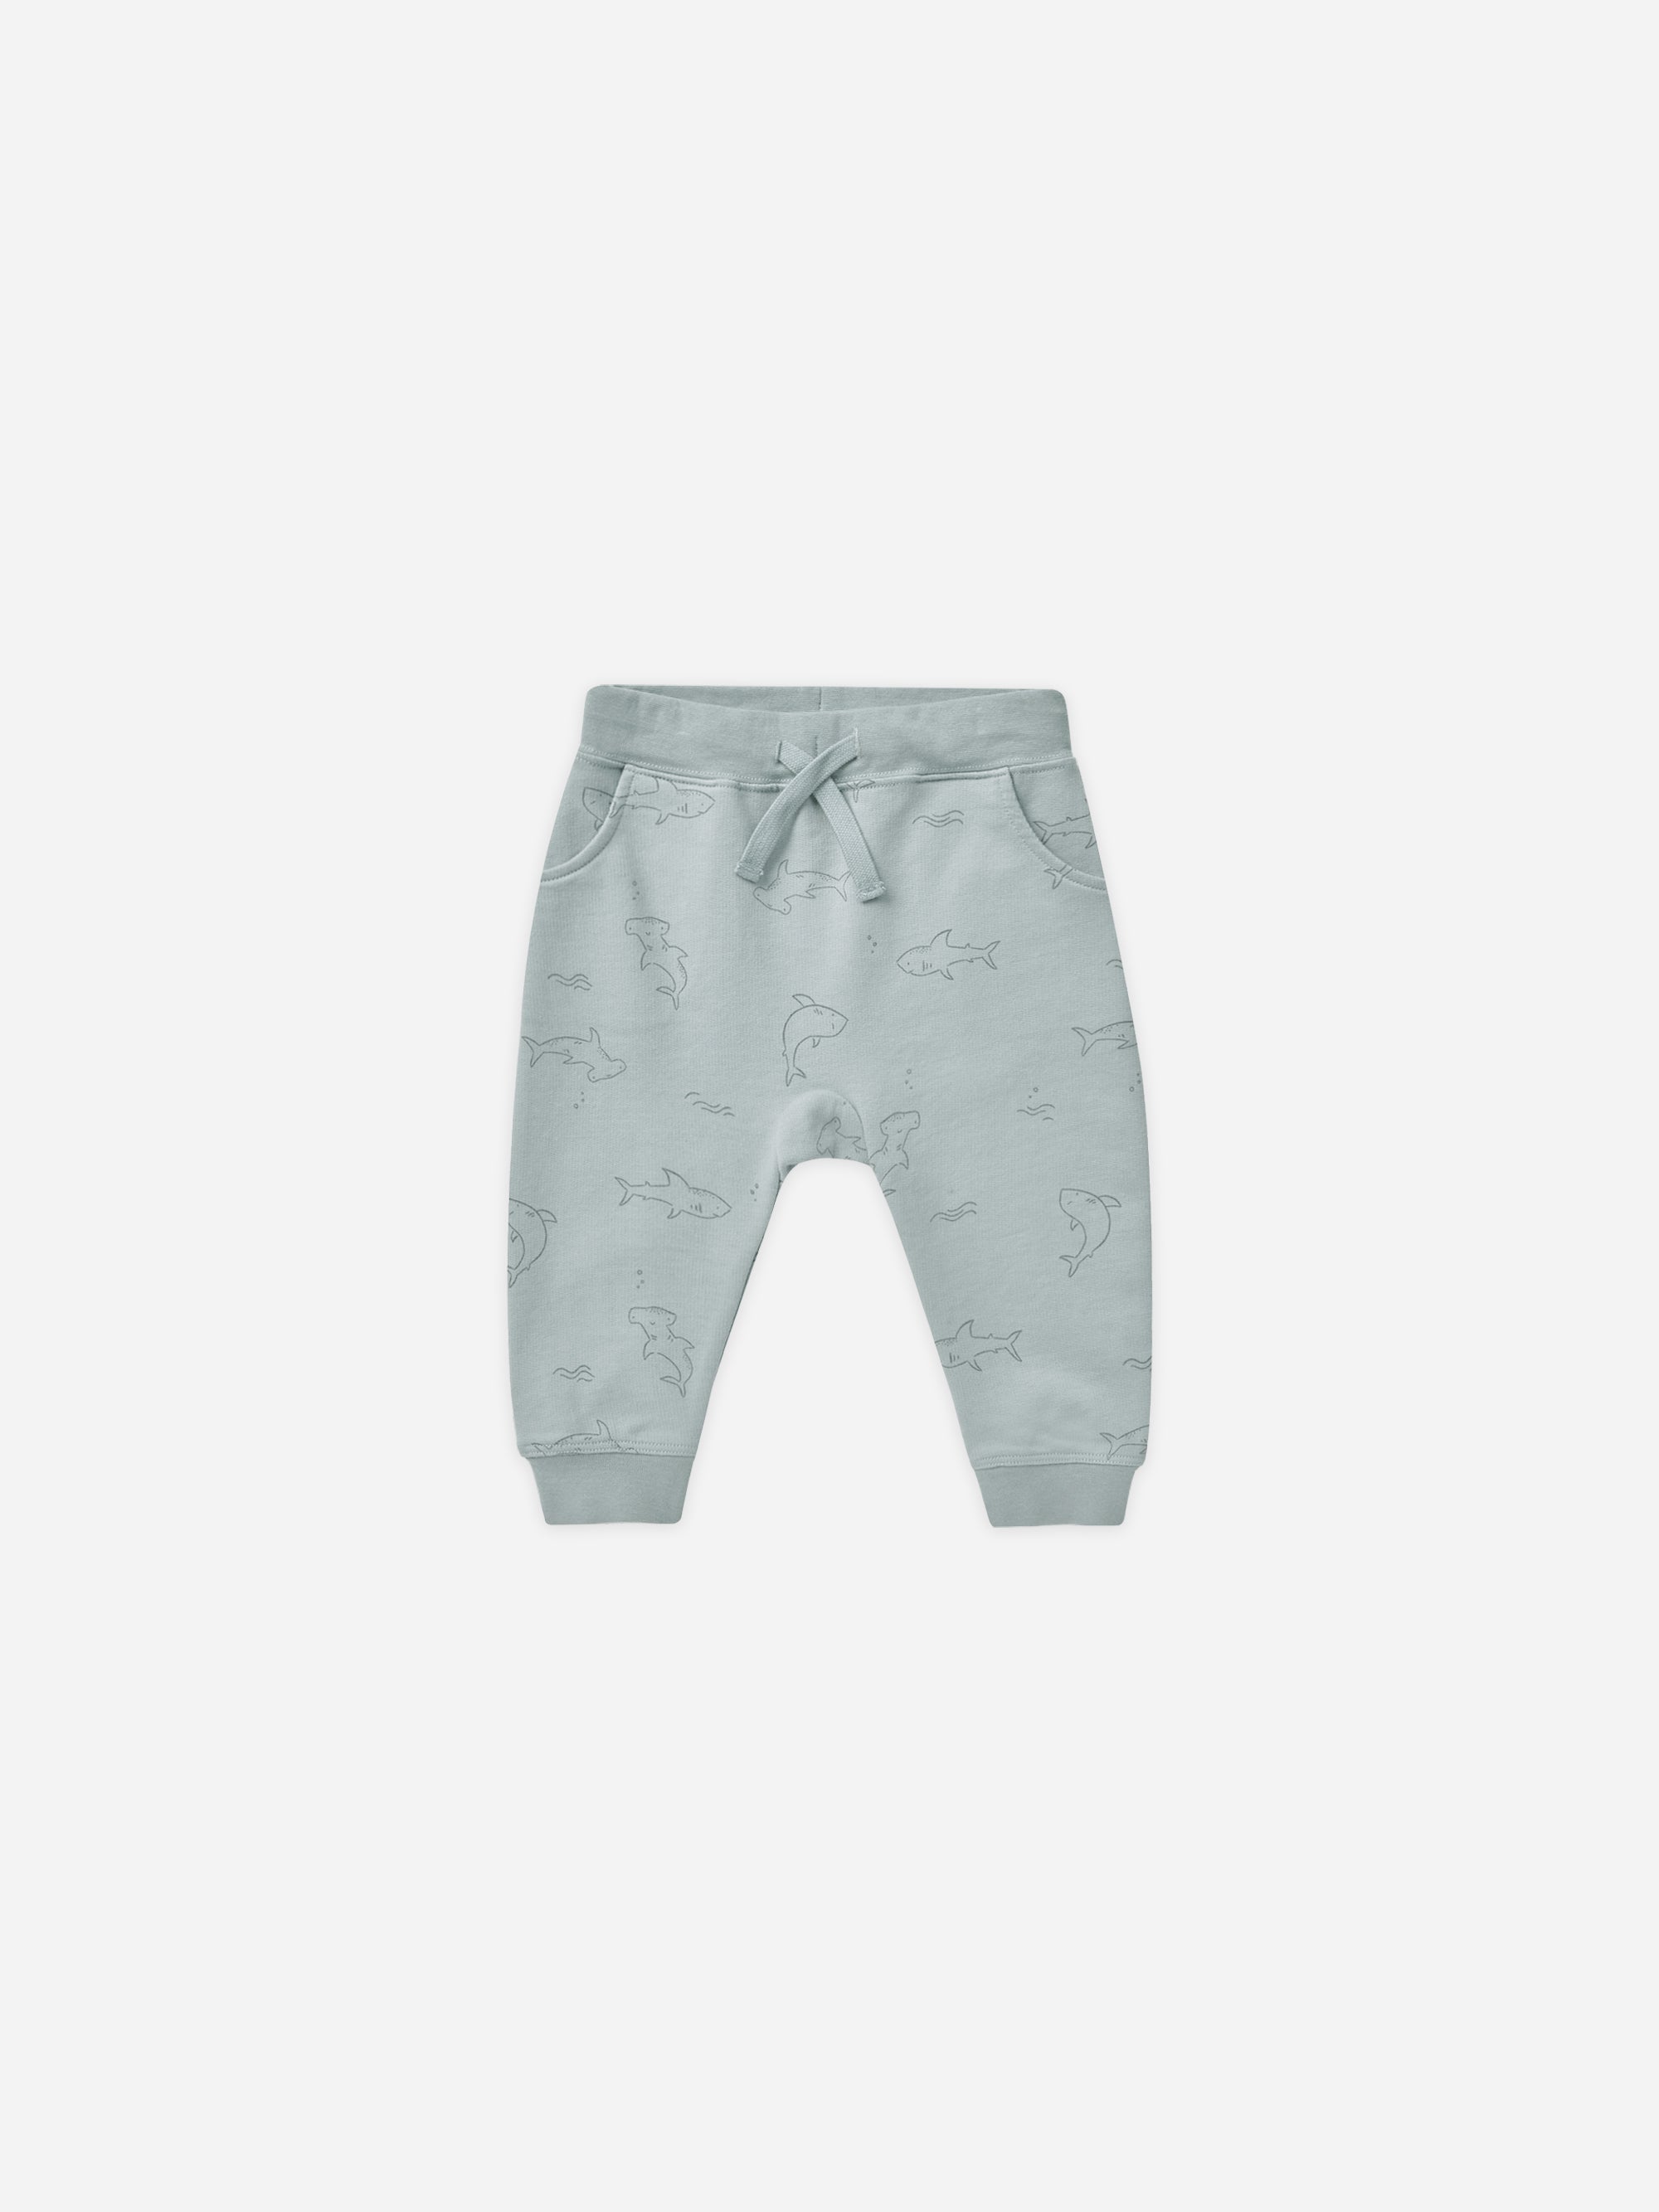 Sweatpant || Sharks - Rylee + Cru | Kids Clothes | Trendy Baby Clothes | Modern Infant Outfits |